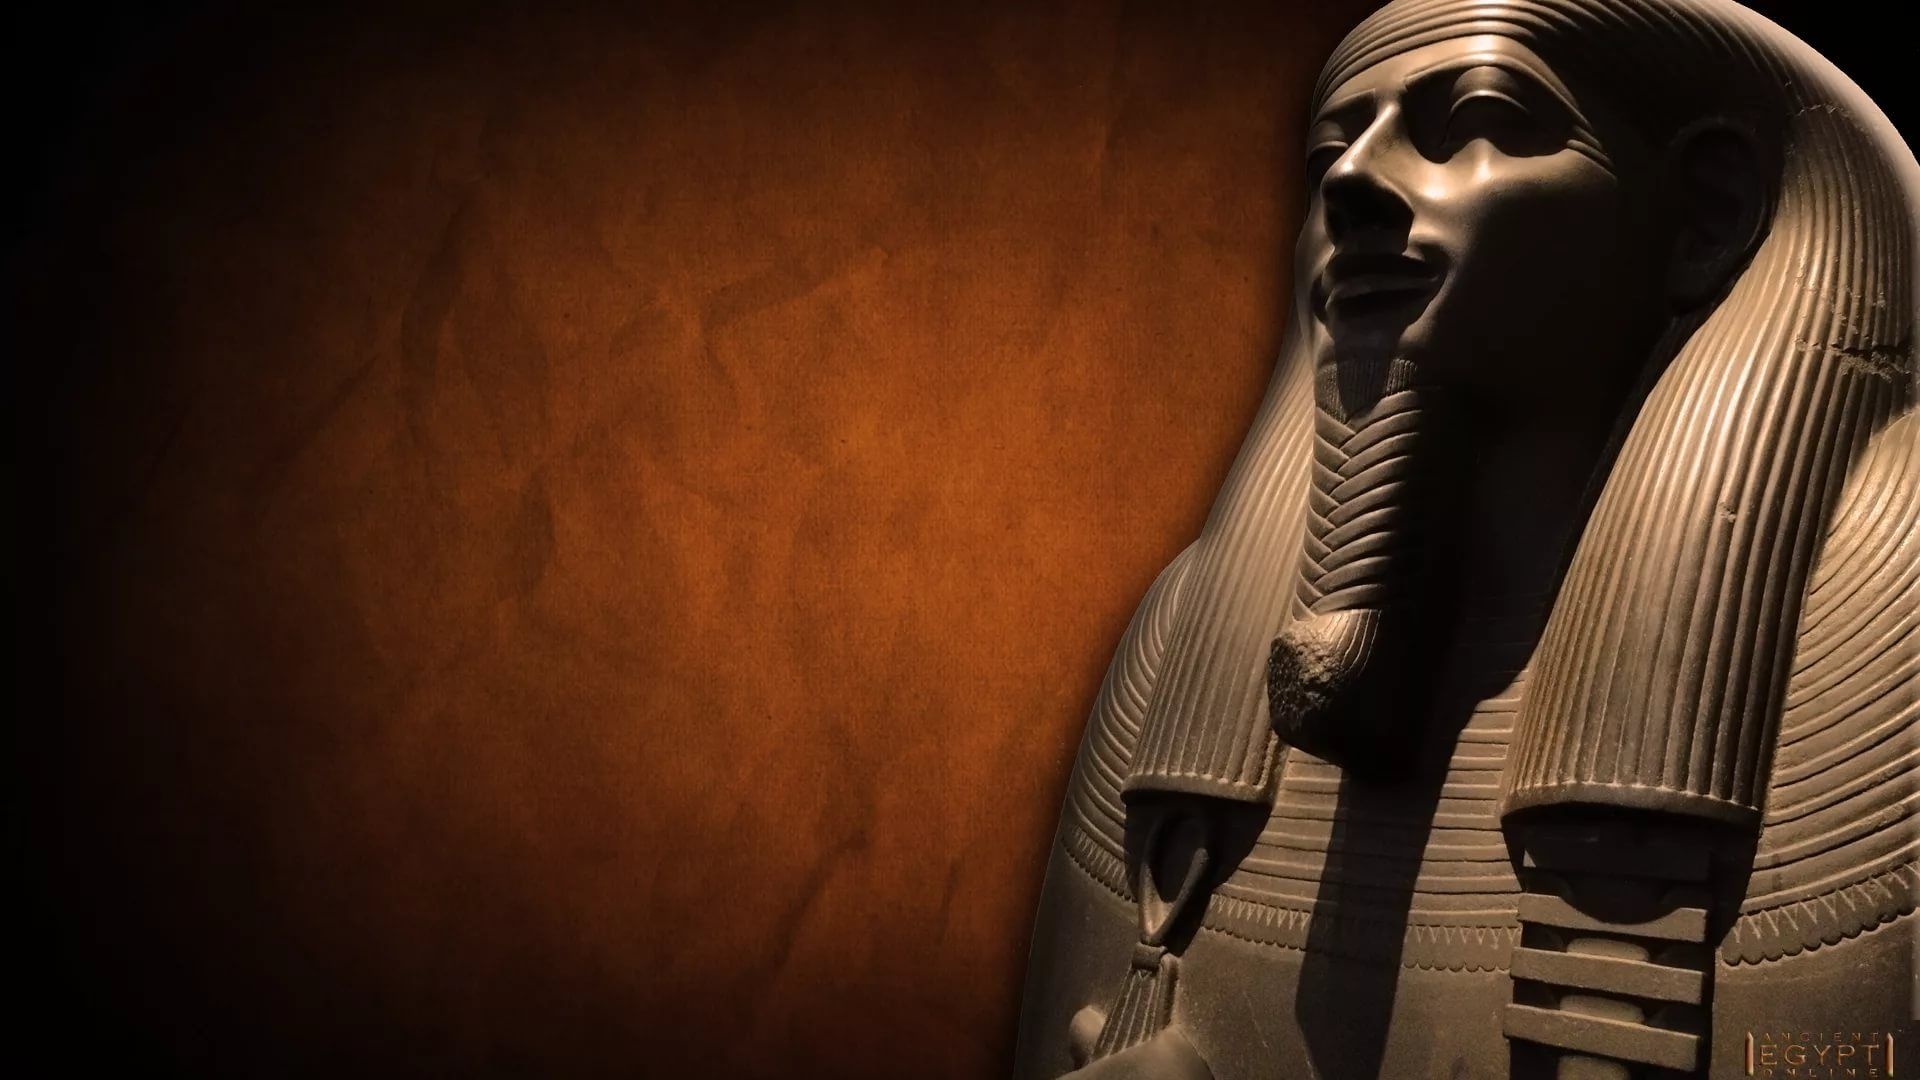 Cool Egyptian wallpapers, Mythical symbols, Ancient civilization, Timeless legacy, 1920x1080 Full HD Desktop